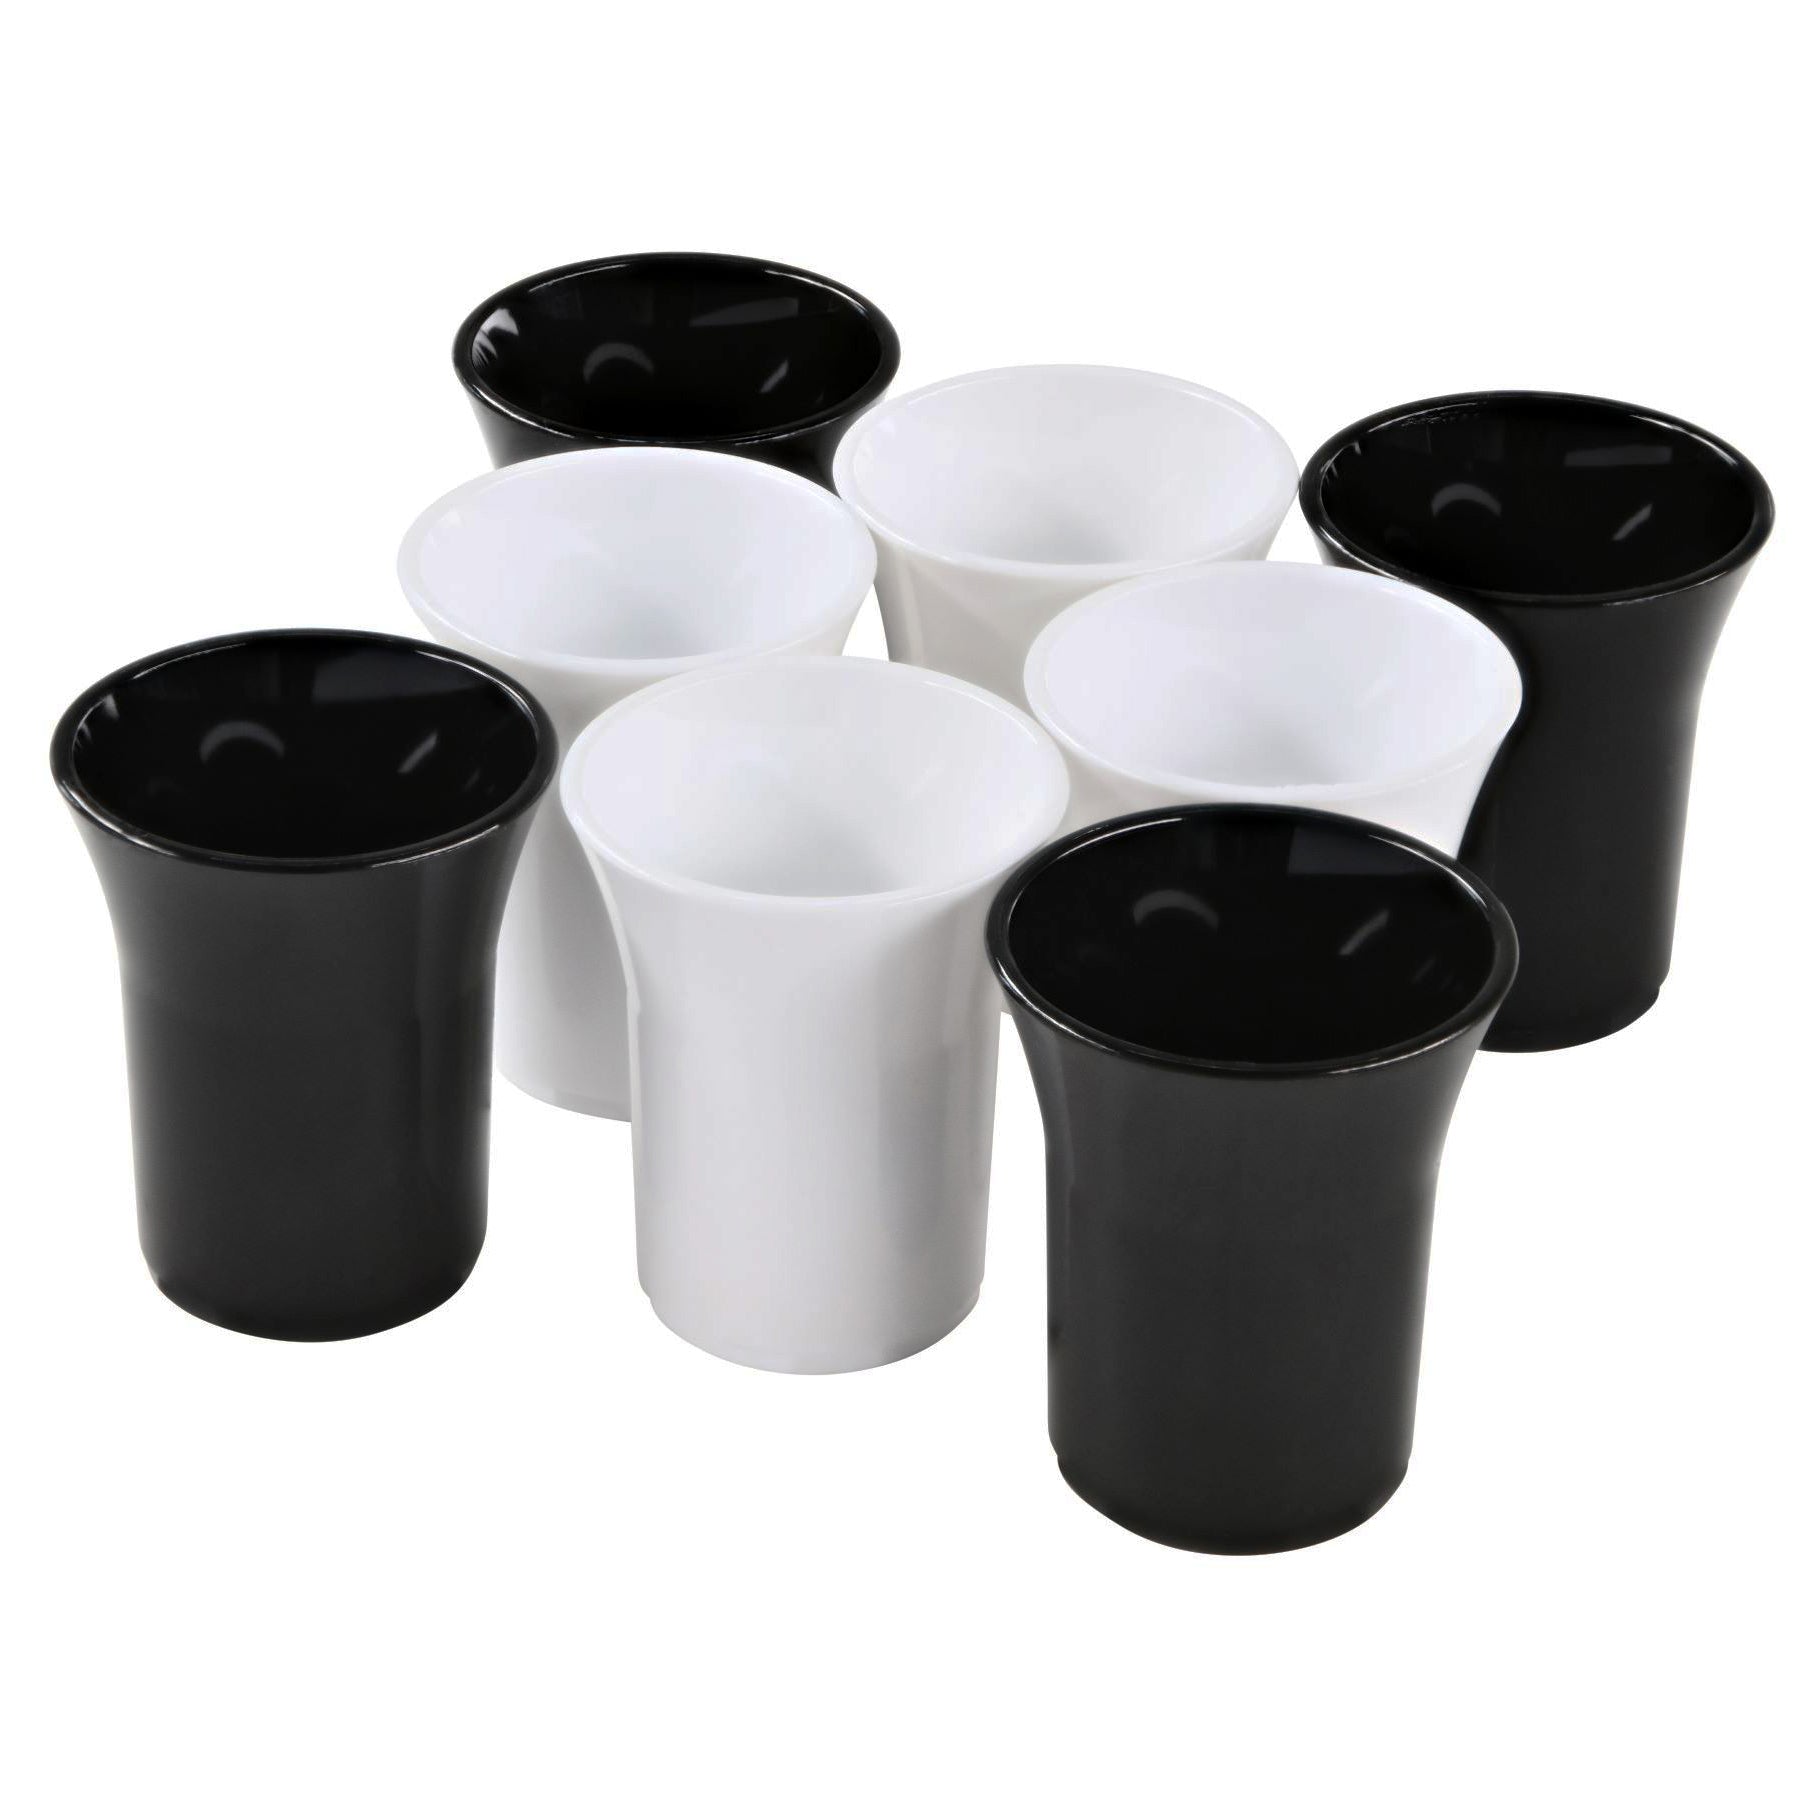 10 x White Shot Glasses Heavy Duty Strong Reusable Plastic 25ml Glossy Liquor, Spirits, Food Sampling, Parties, BBQs, Pubs, Clubs, Jelly-5056020186885-PCUP-SHOT-WHITE-10-Product Pro-25ml, Plastic Shot Glasses, Reusable Shot Glasses, Shot Glasses, Shots, White, White Shot Glasses